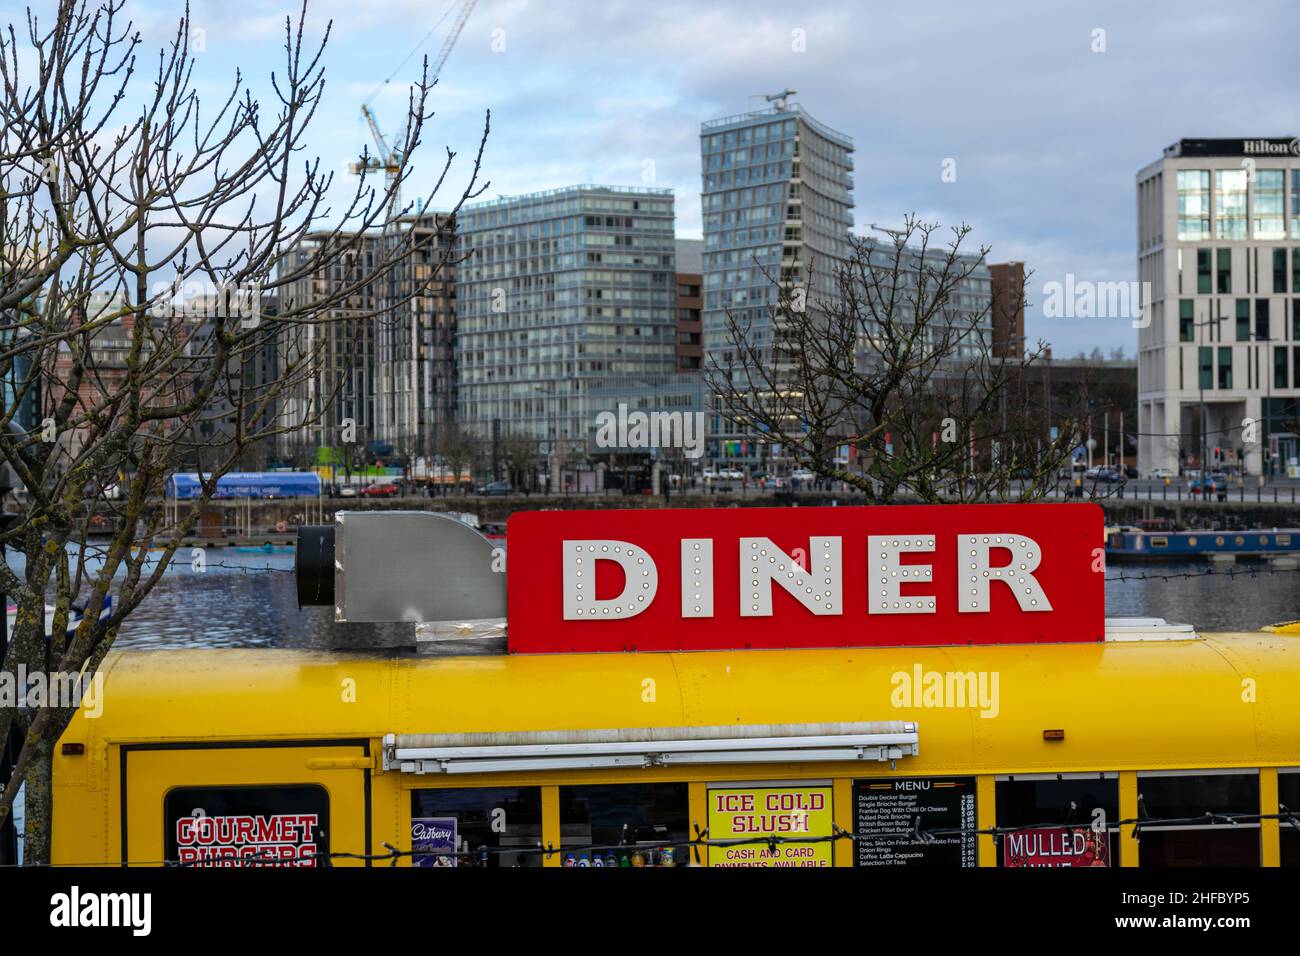 Liverpool, UK - 6 January 2020: A yellow Dinner bus restaurant serving food and drinks in Liverpool city centre on the Merseyside dock Stock Photo